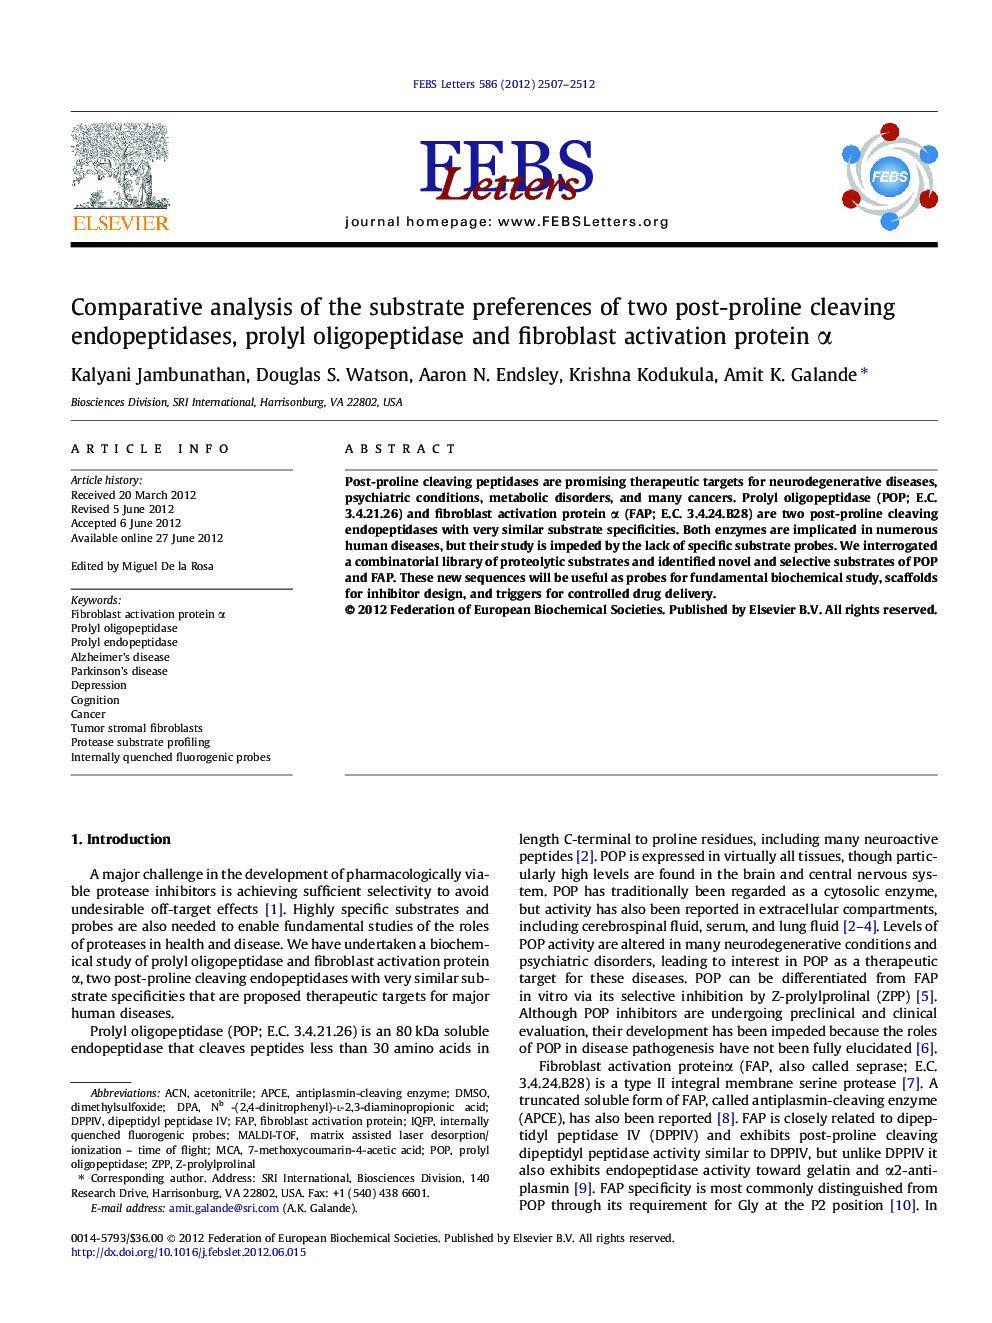 Comparative analysis of the substrate preferences of two post-proline cleaving endopeptidases, prolyl oligopeptidase and fibroblast activation protein Î±